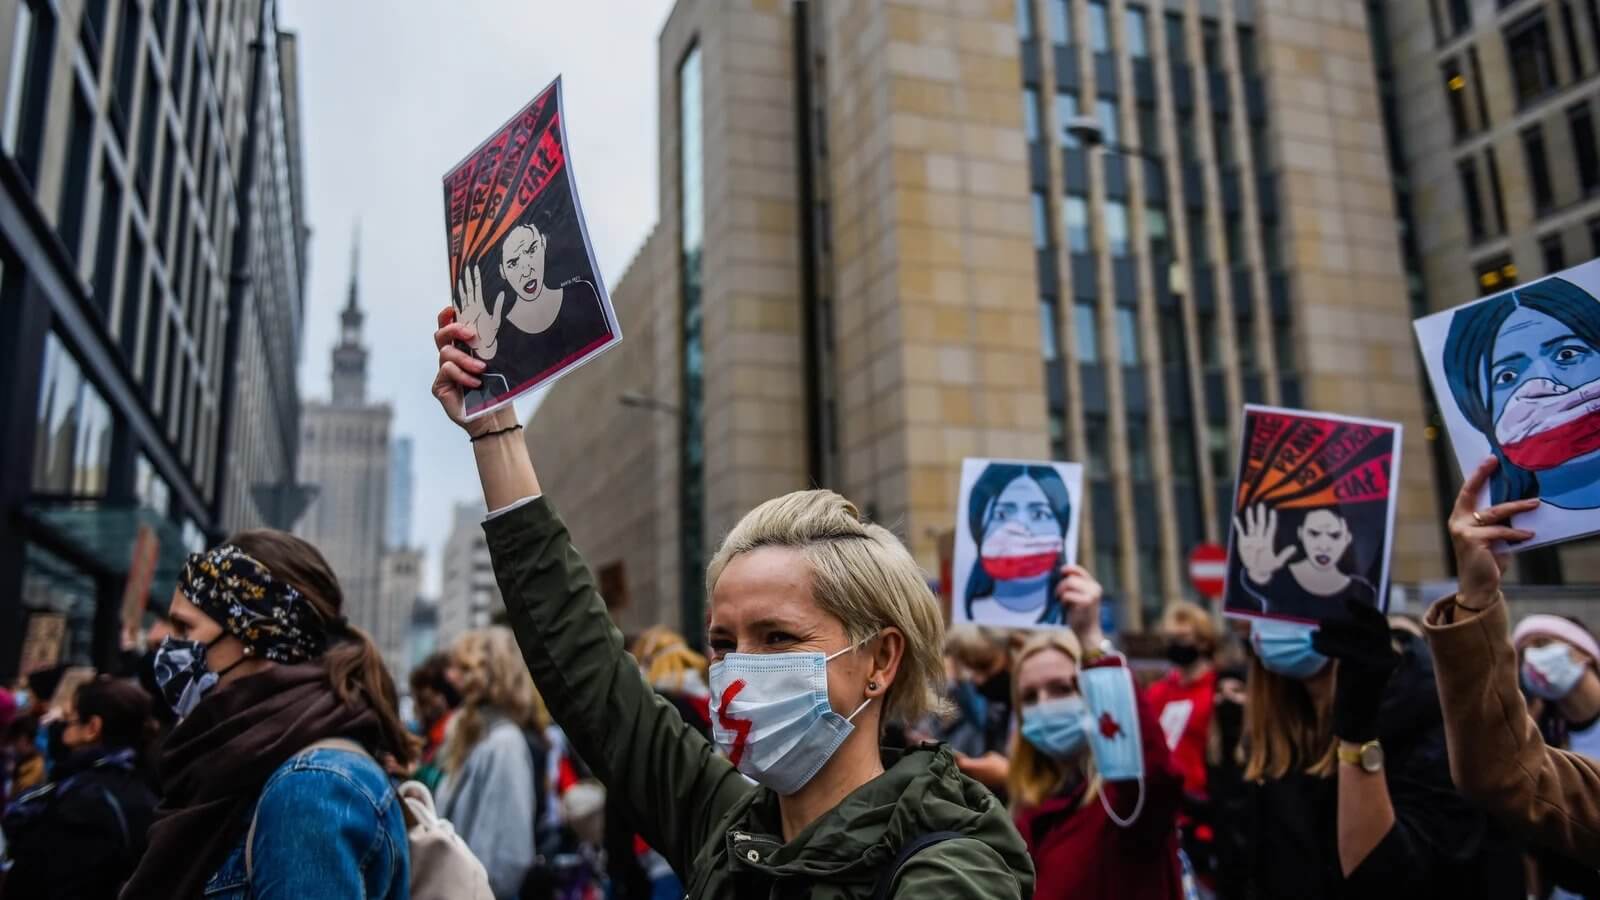 Poland Delays Near-Total Abortion Ban Amid Widespread Protests